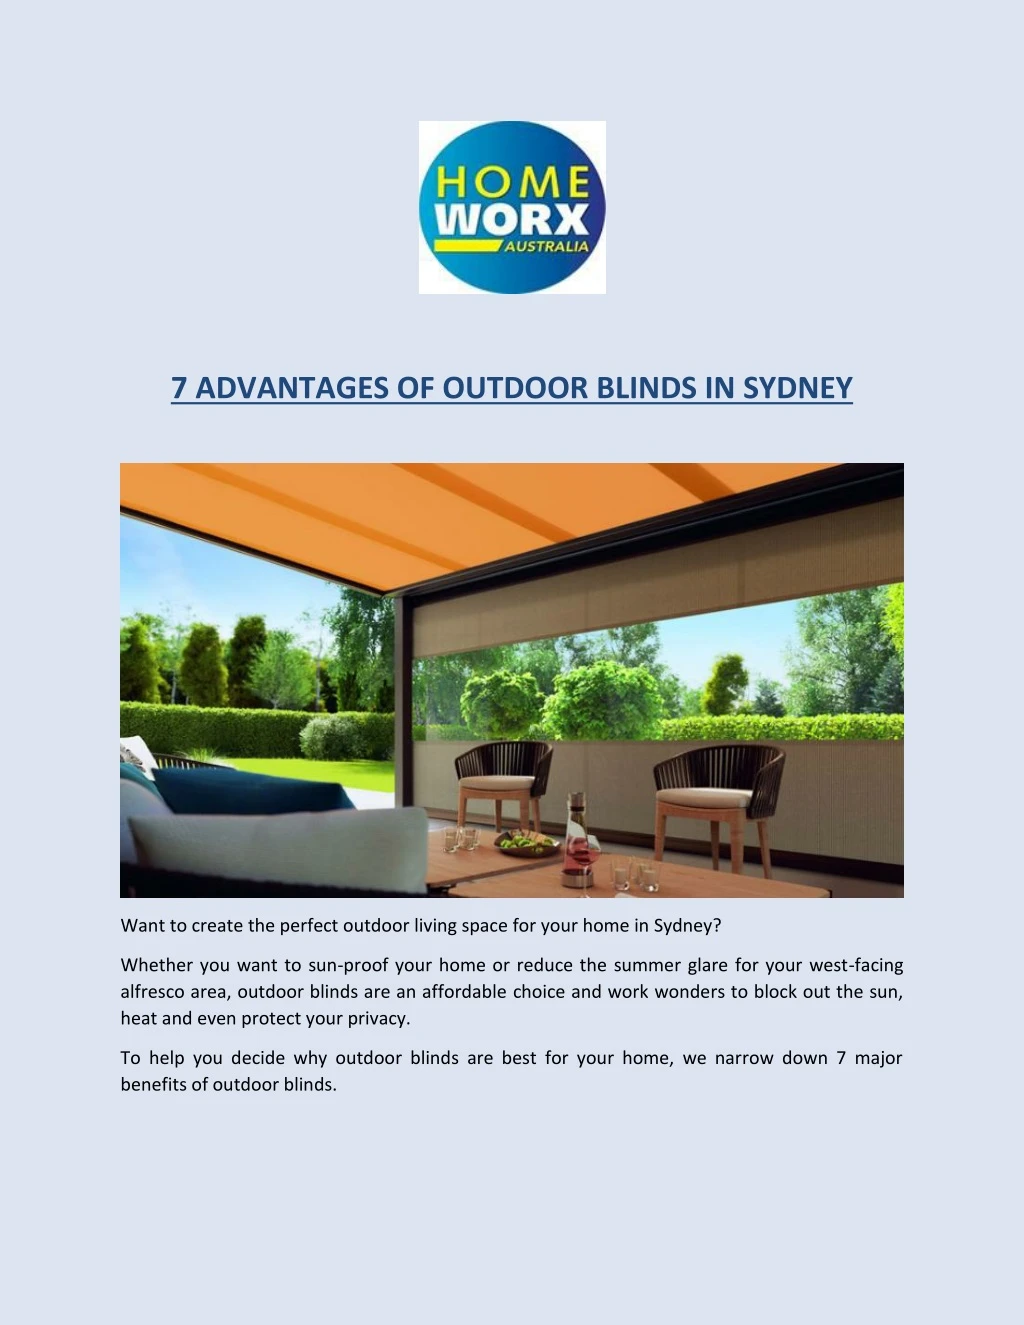 7 advantages of outdoor blinds in sydney